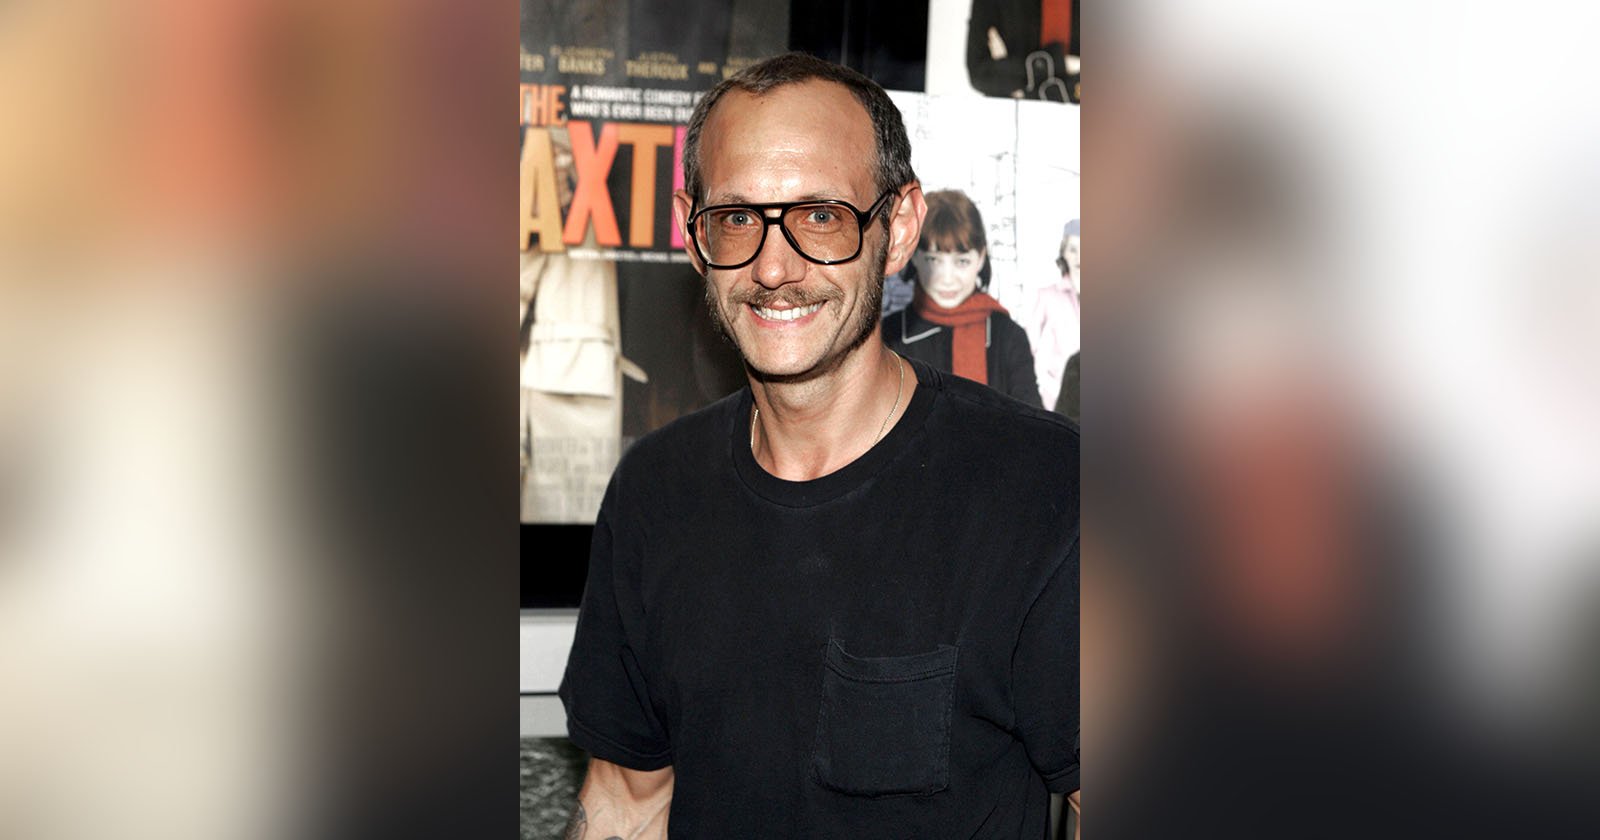  photographer terry richardson accused sexual assault lawsuits 